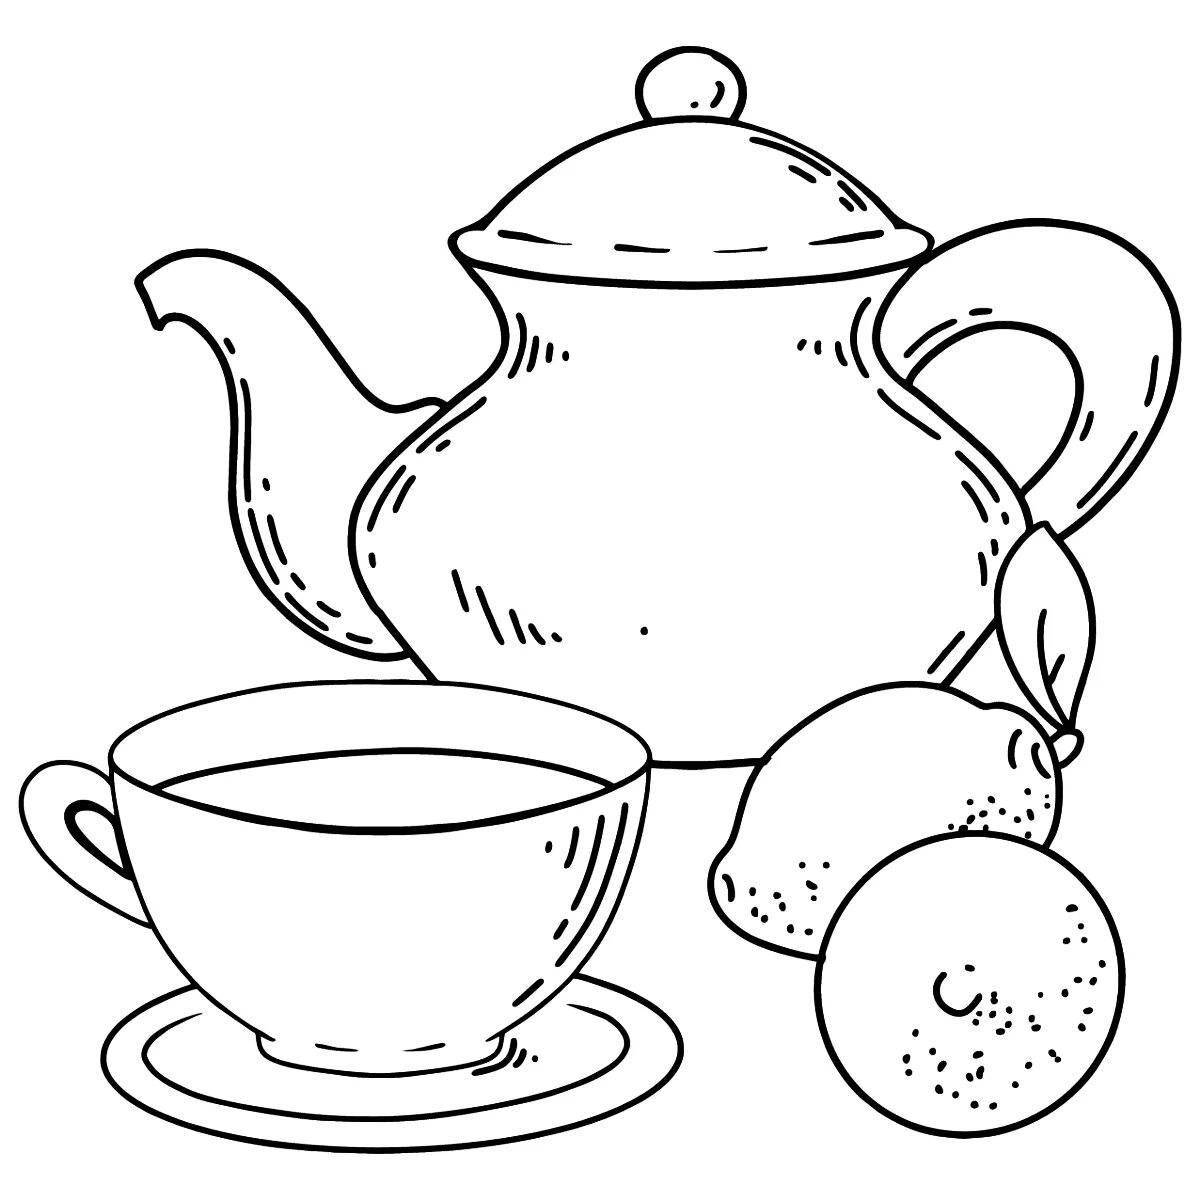 Exquisite teapot and cup coloring book for kids